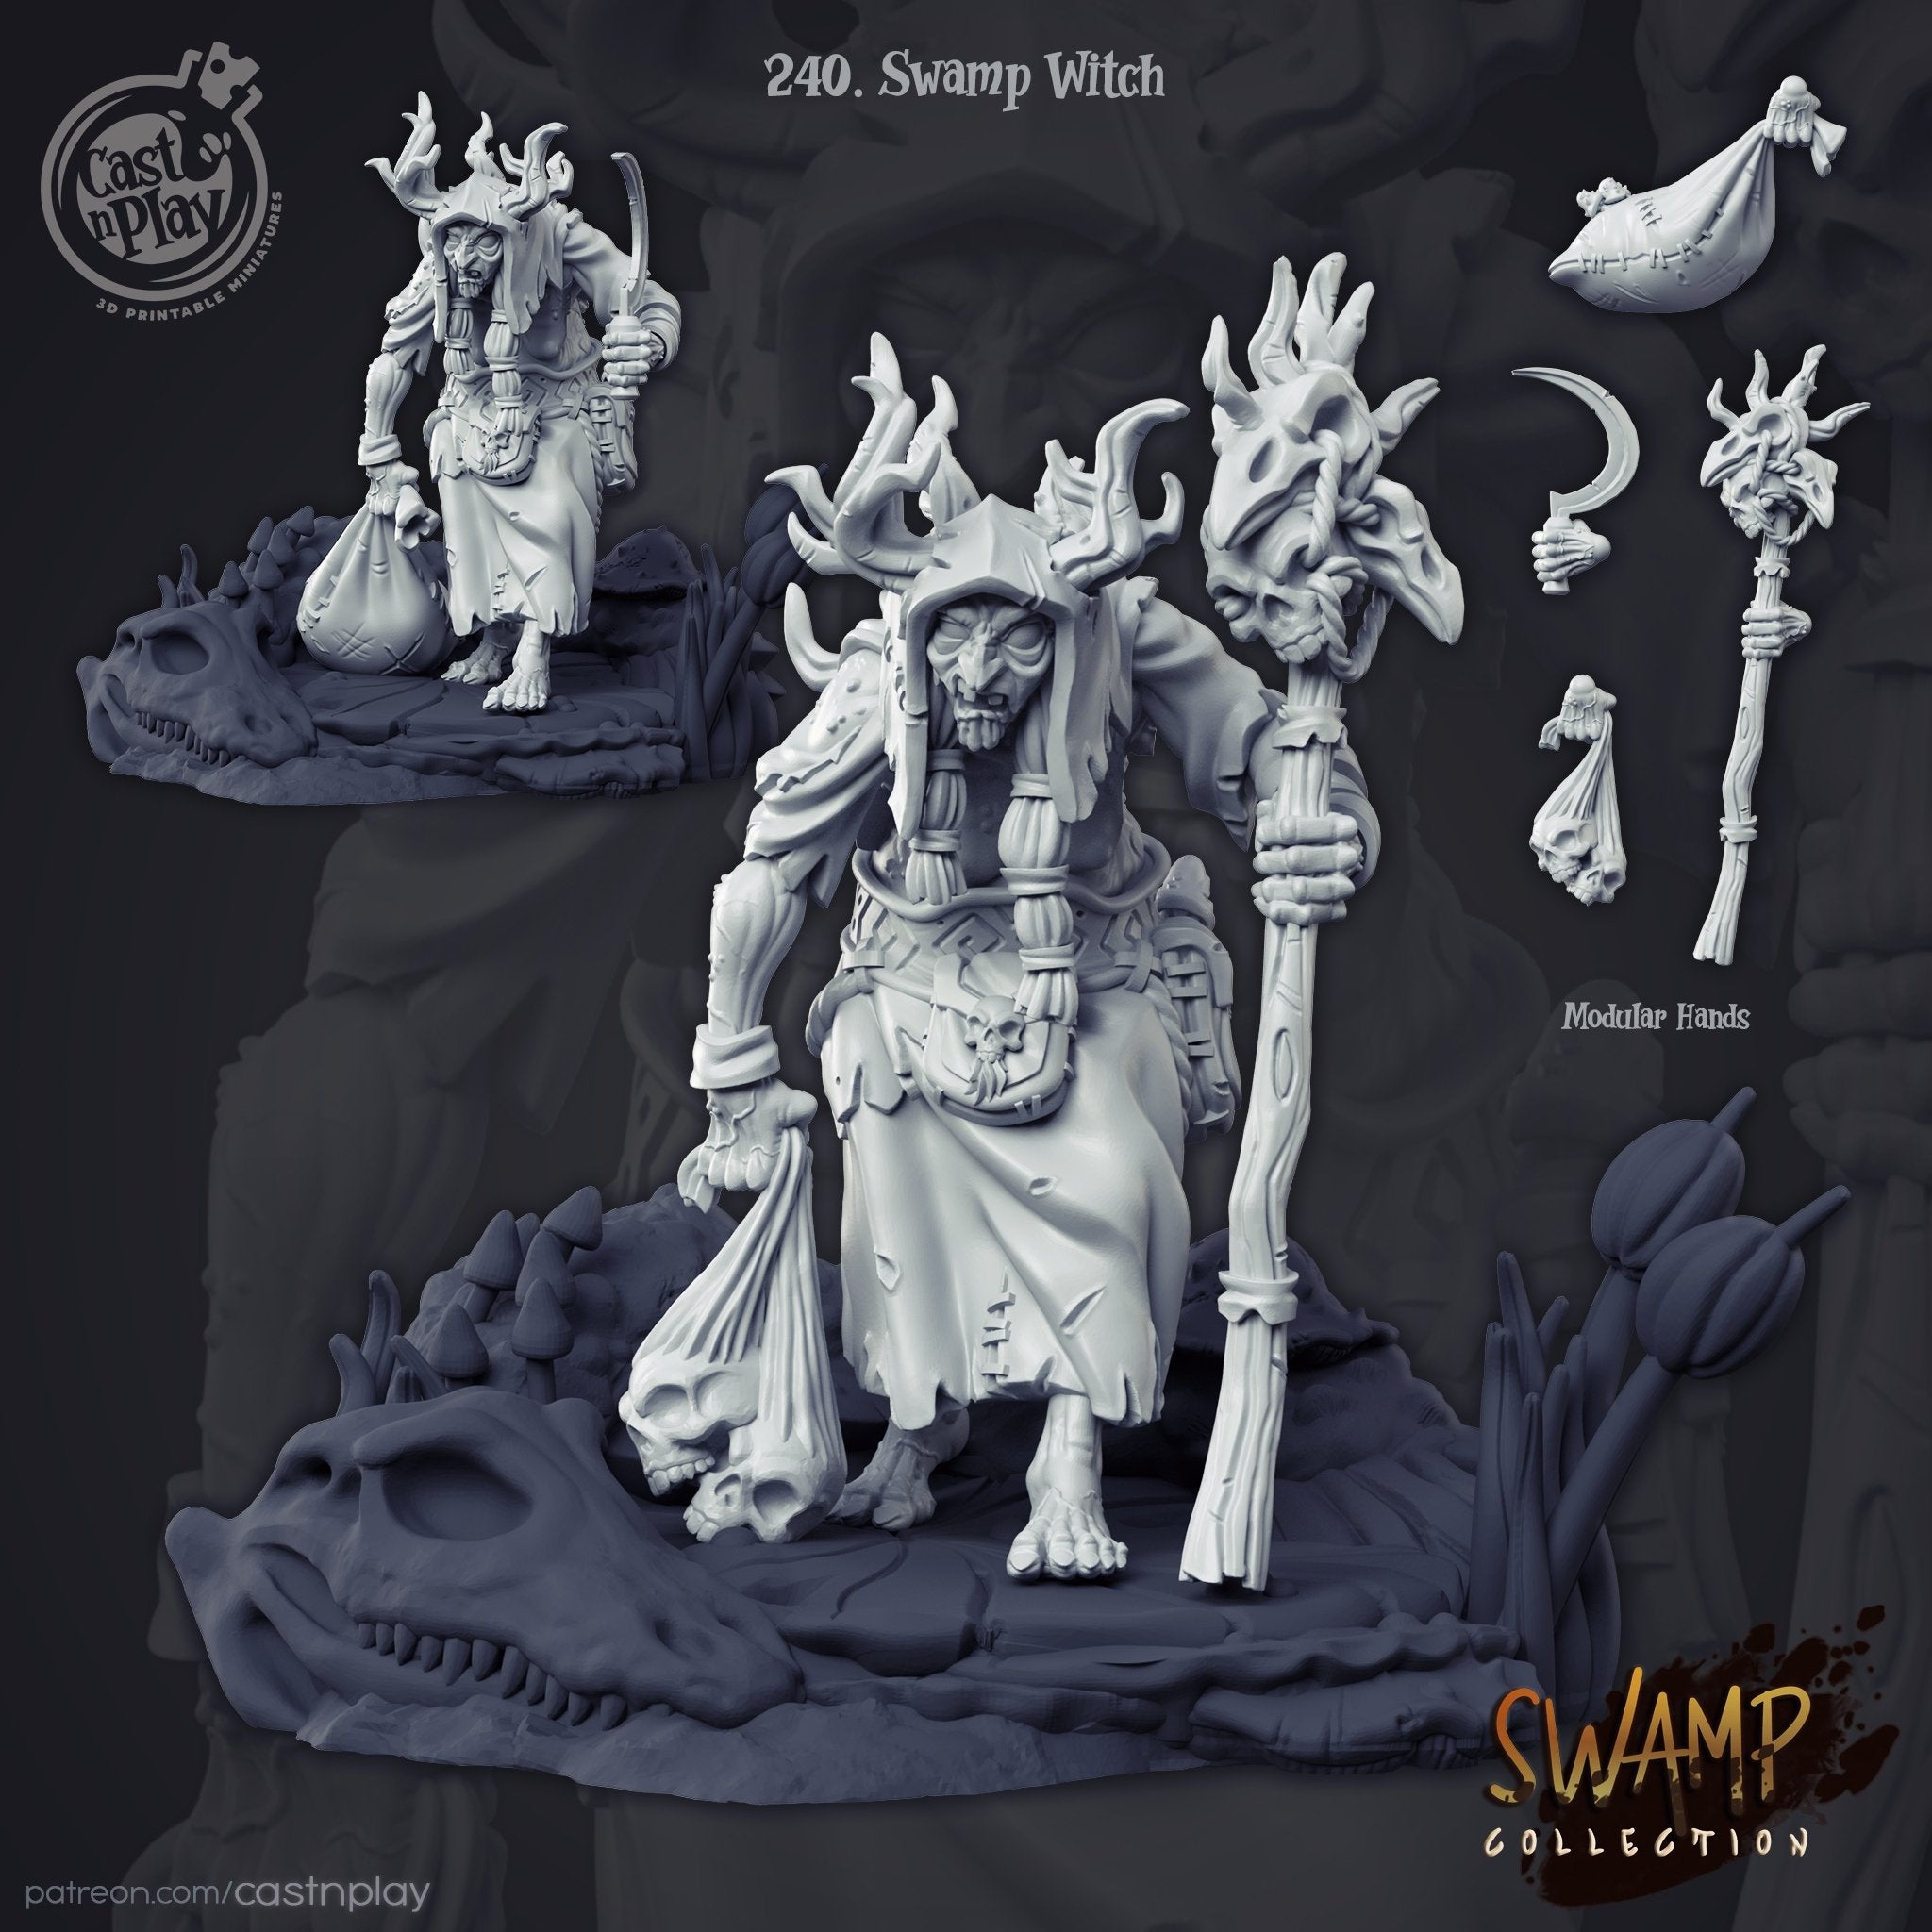 Swamp Witch - The Printable Dragon